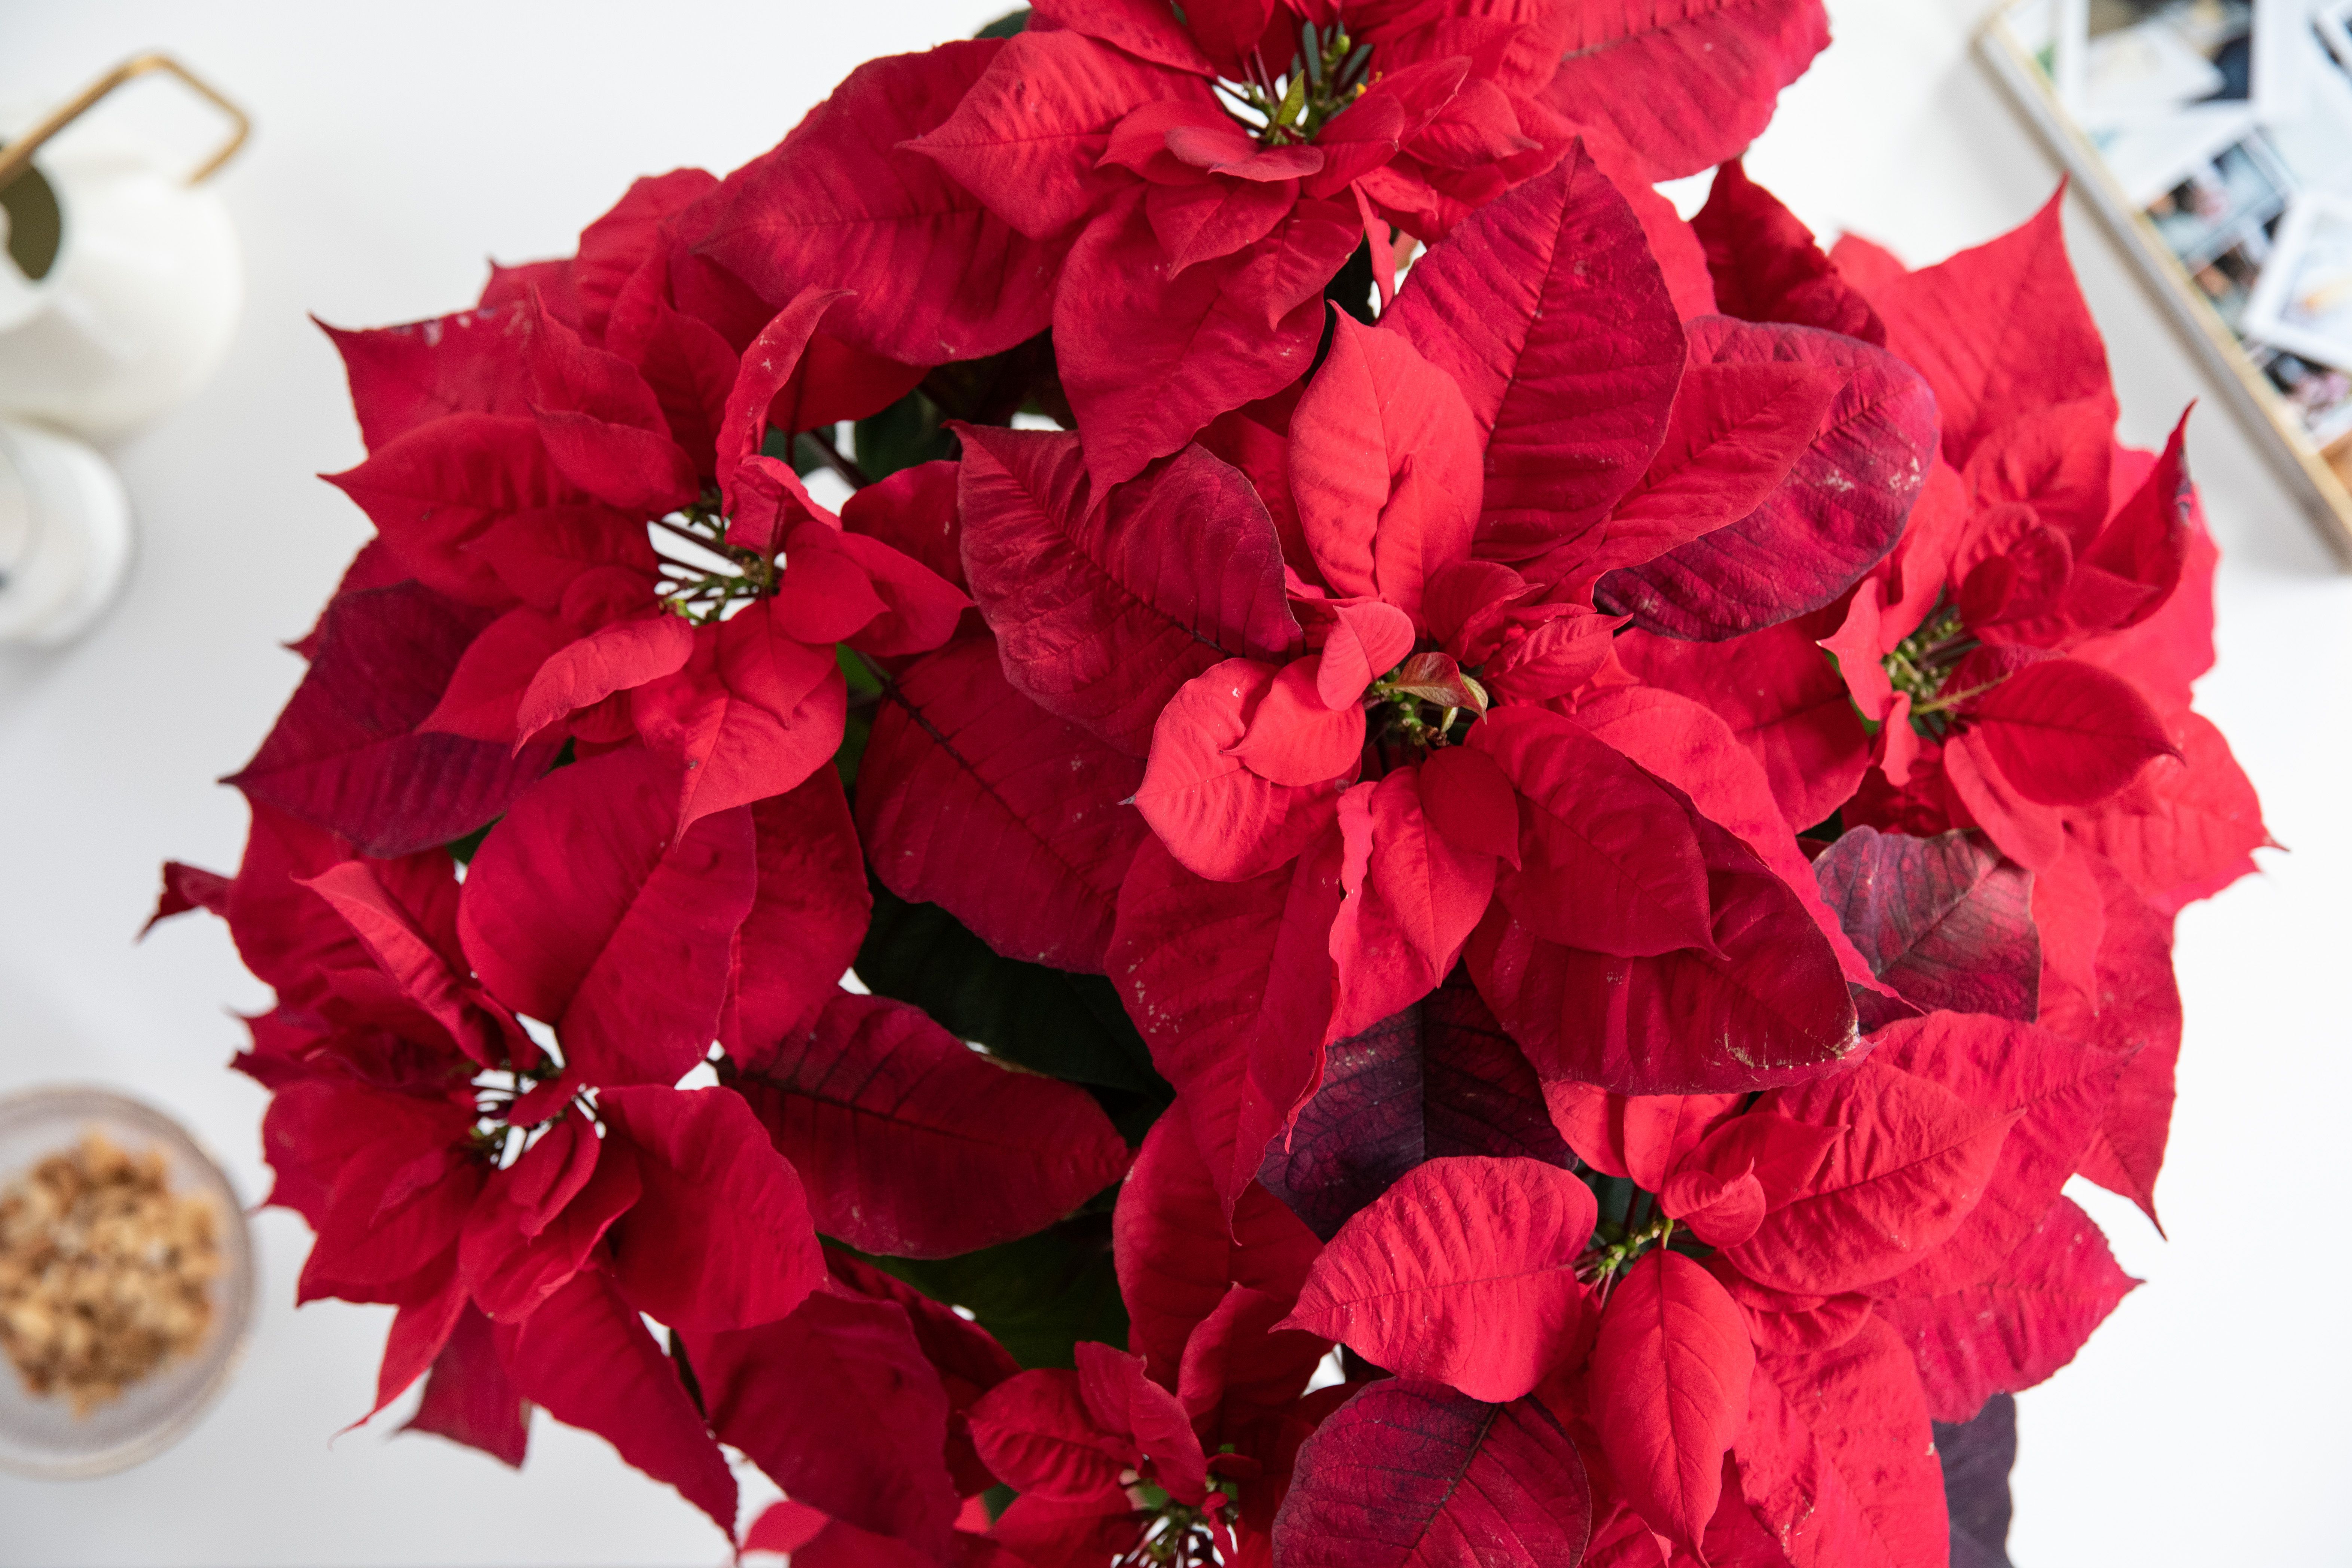 15 Festive Christmas Plants and Their Meanings